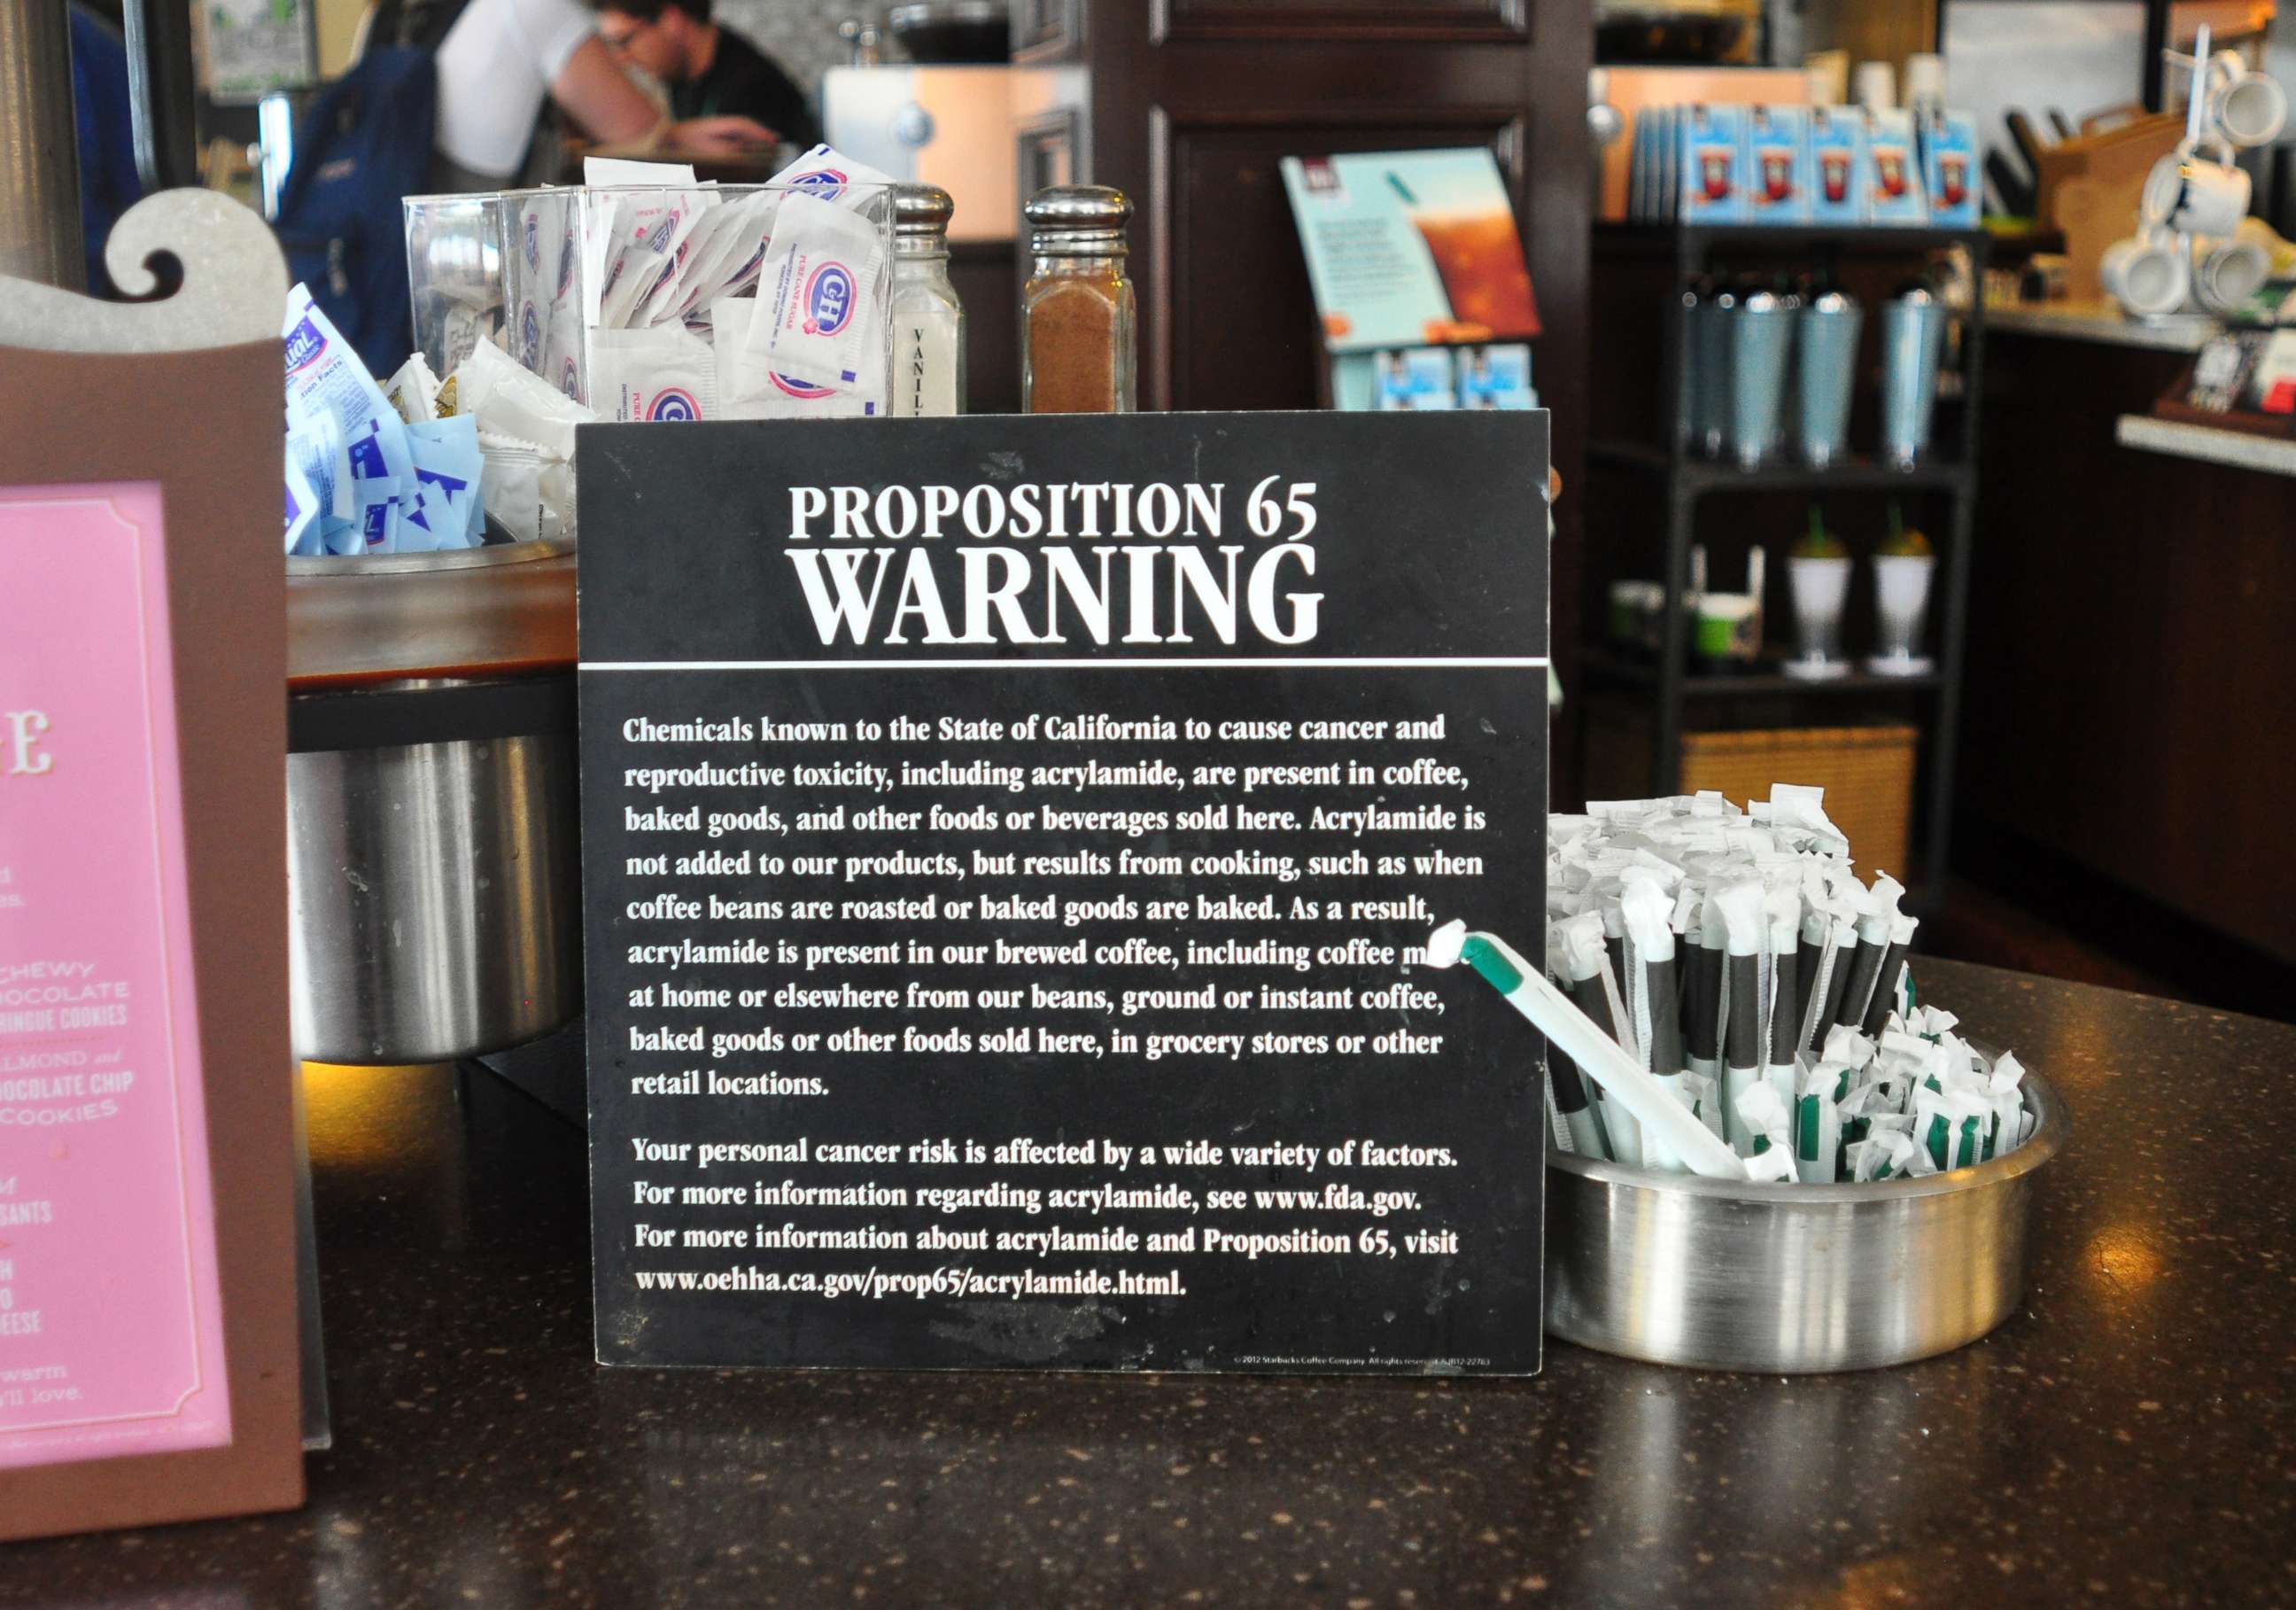 PHOTO: A sign in a San Francisco Starbucks coffee shop warns customers that coffee and baked goods sold at the shop and elsewhere contain acrylamide, a chemical known to cause cancer and reproductive toxicity this May 18, 2013 file photo.